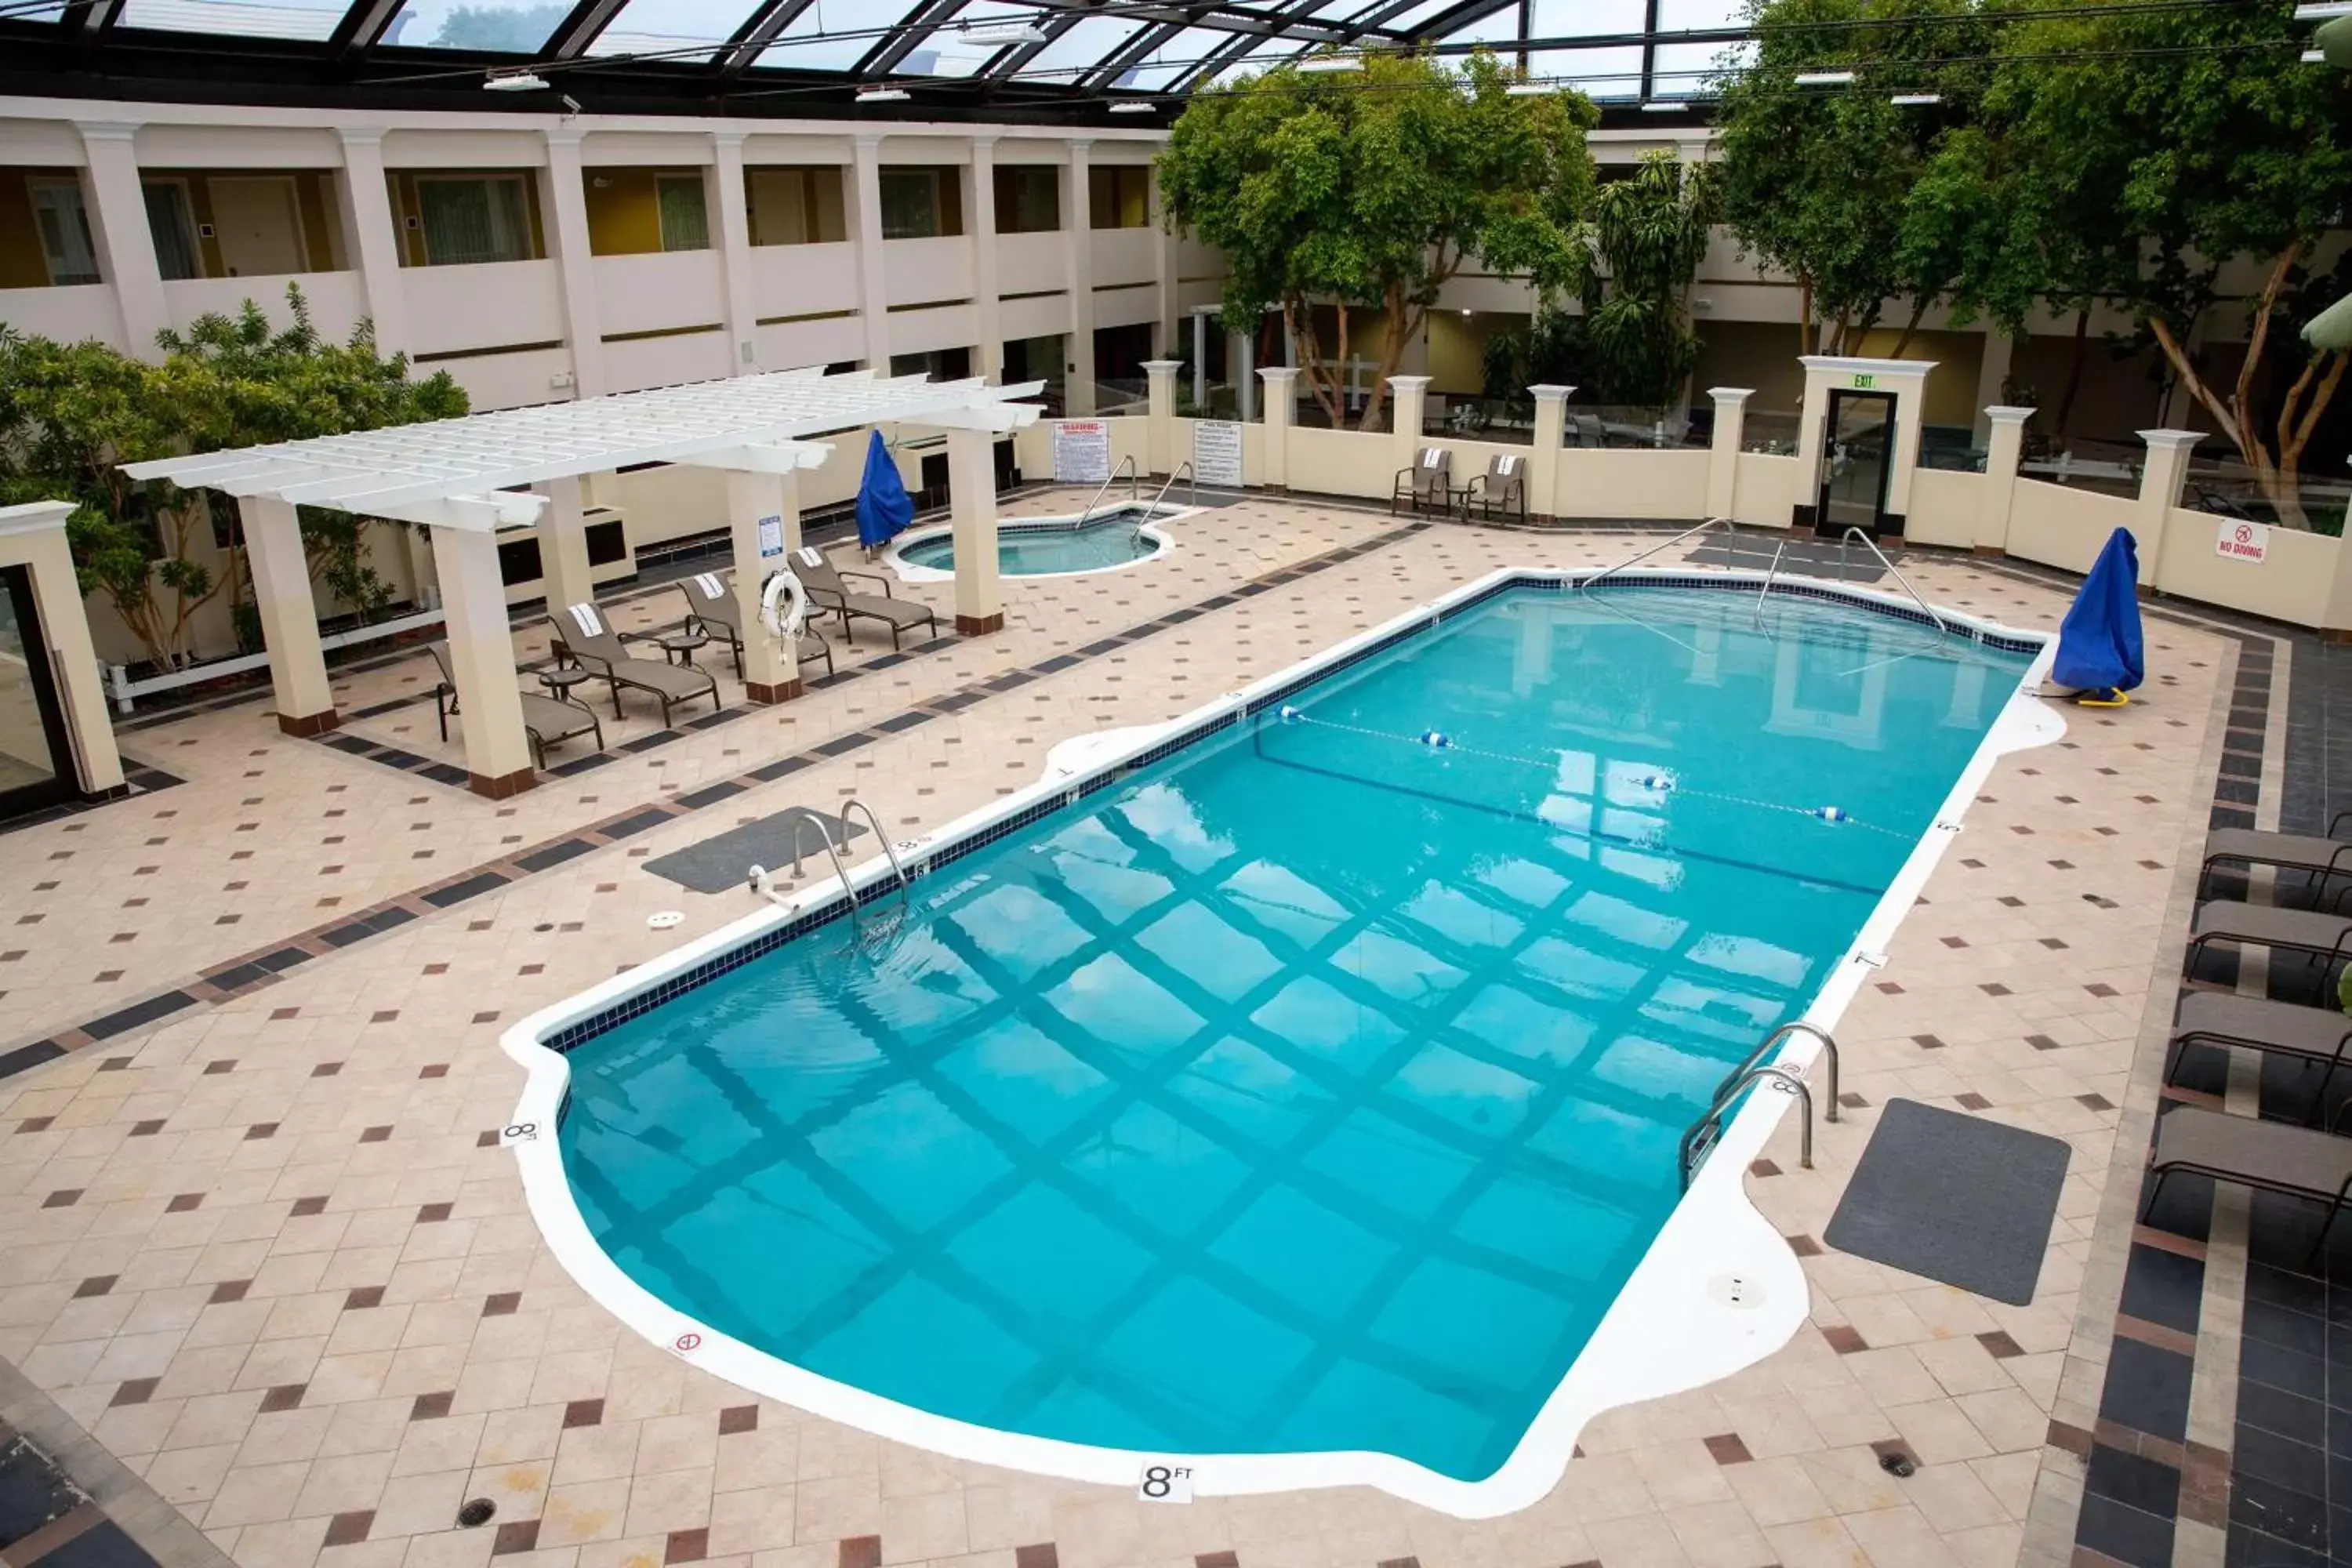 On site, Pool View in Best Western Plus Milwaukee Airport Hotel & Conference Center